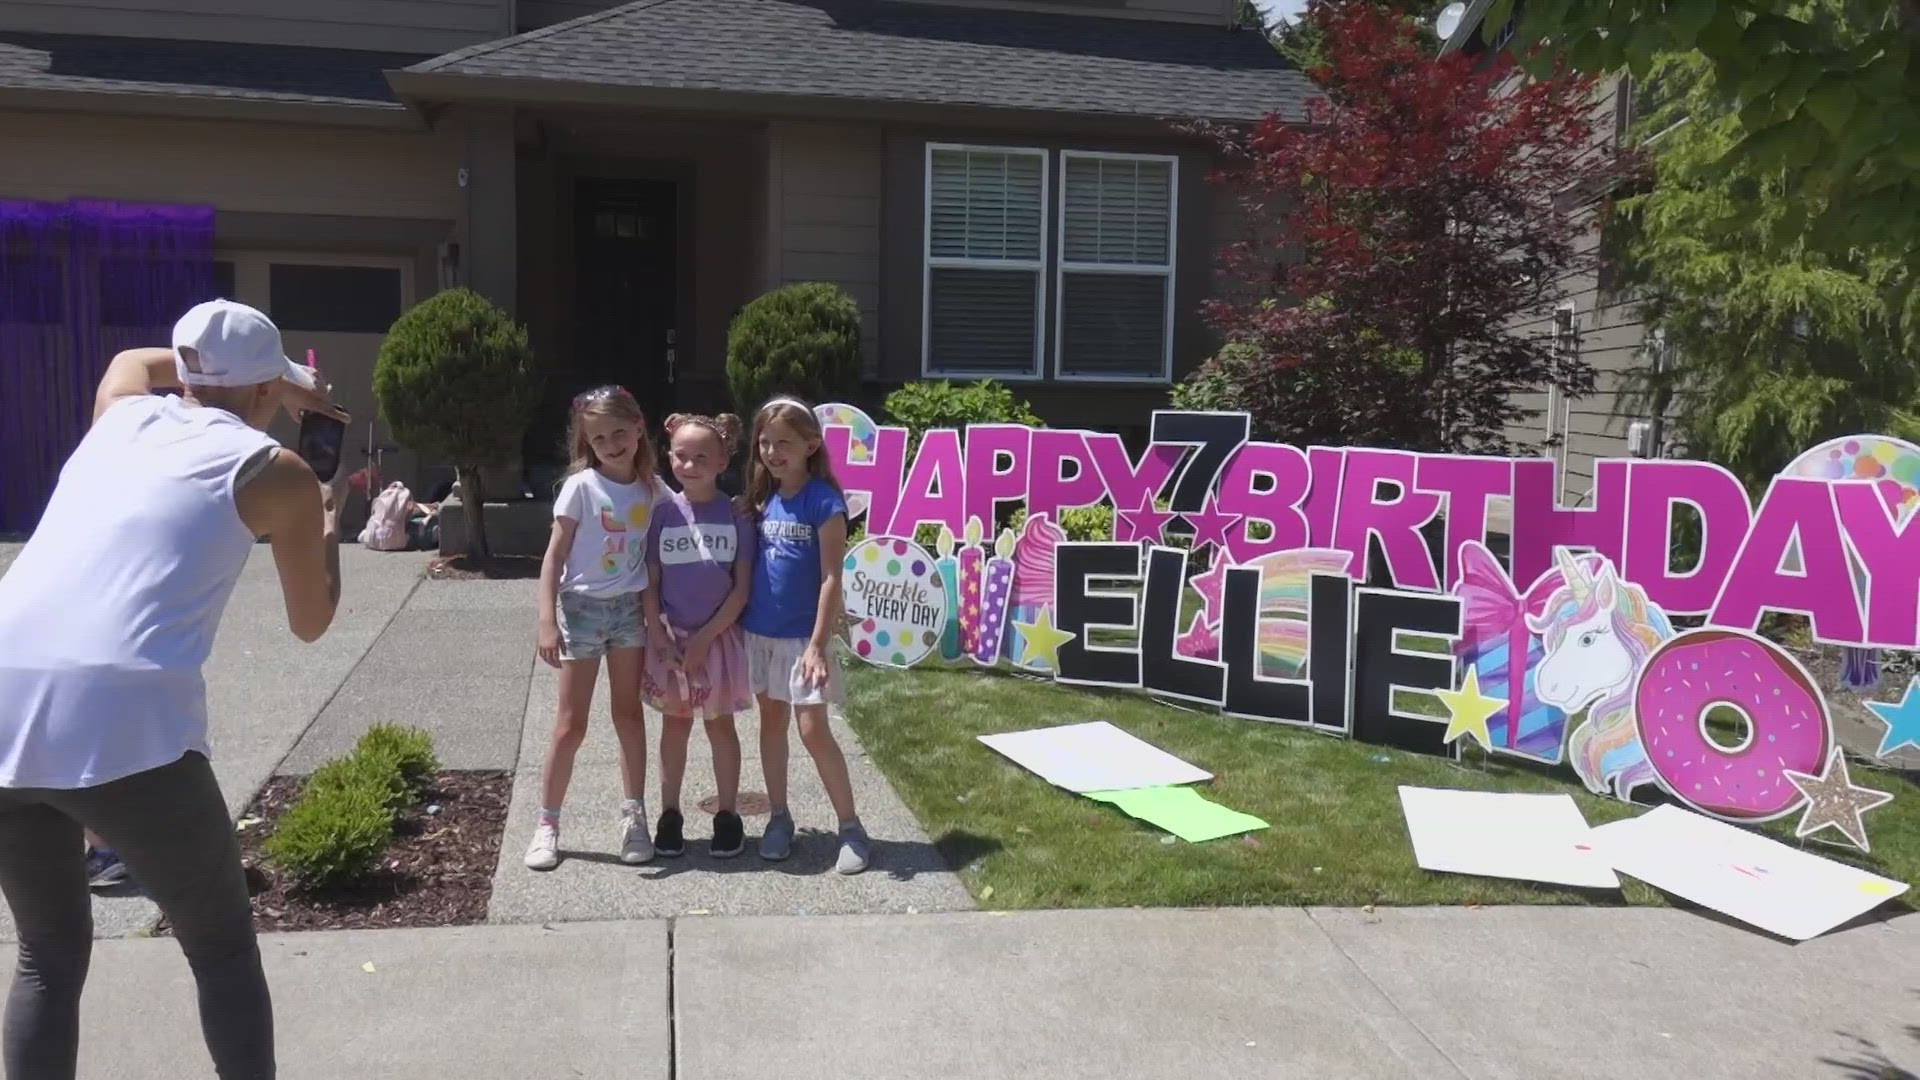 Neighbors surprise 7-year-old, whose mother was battling cancer